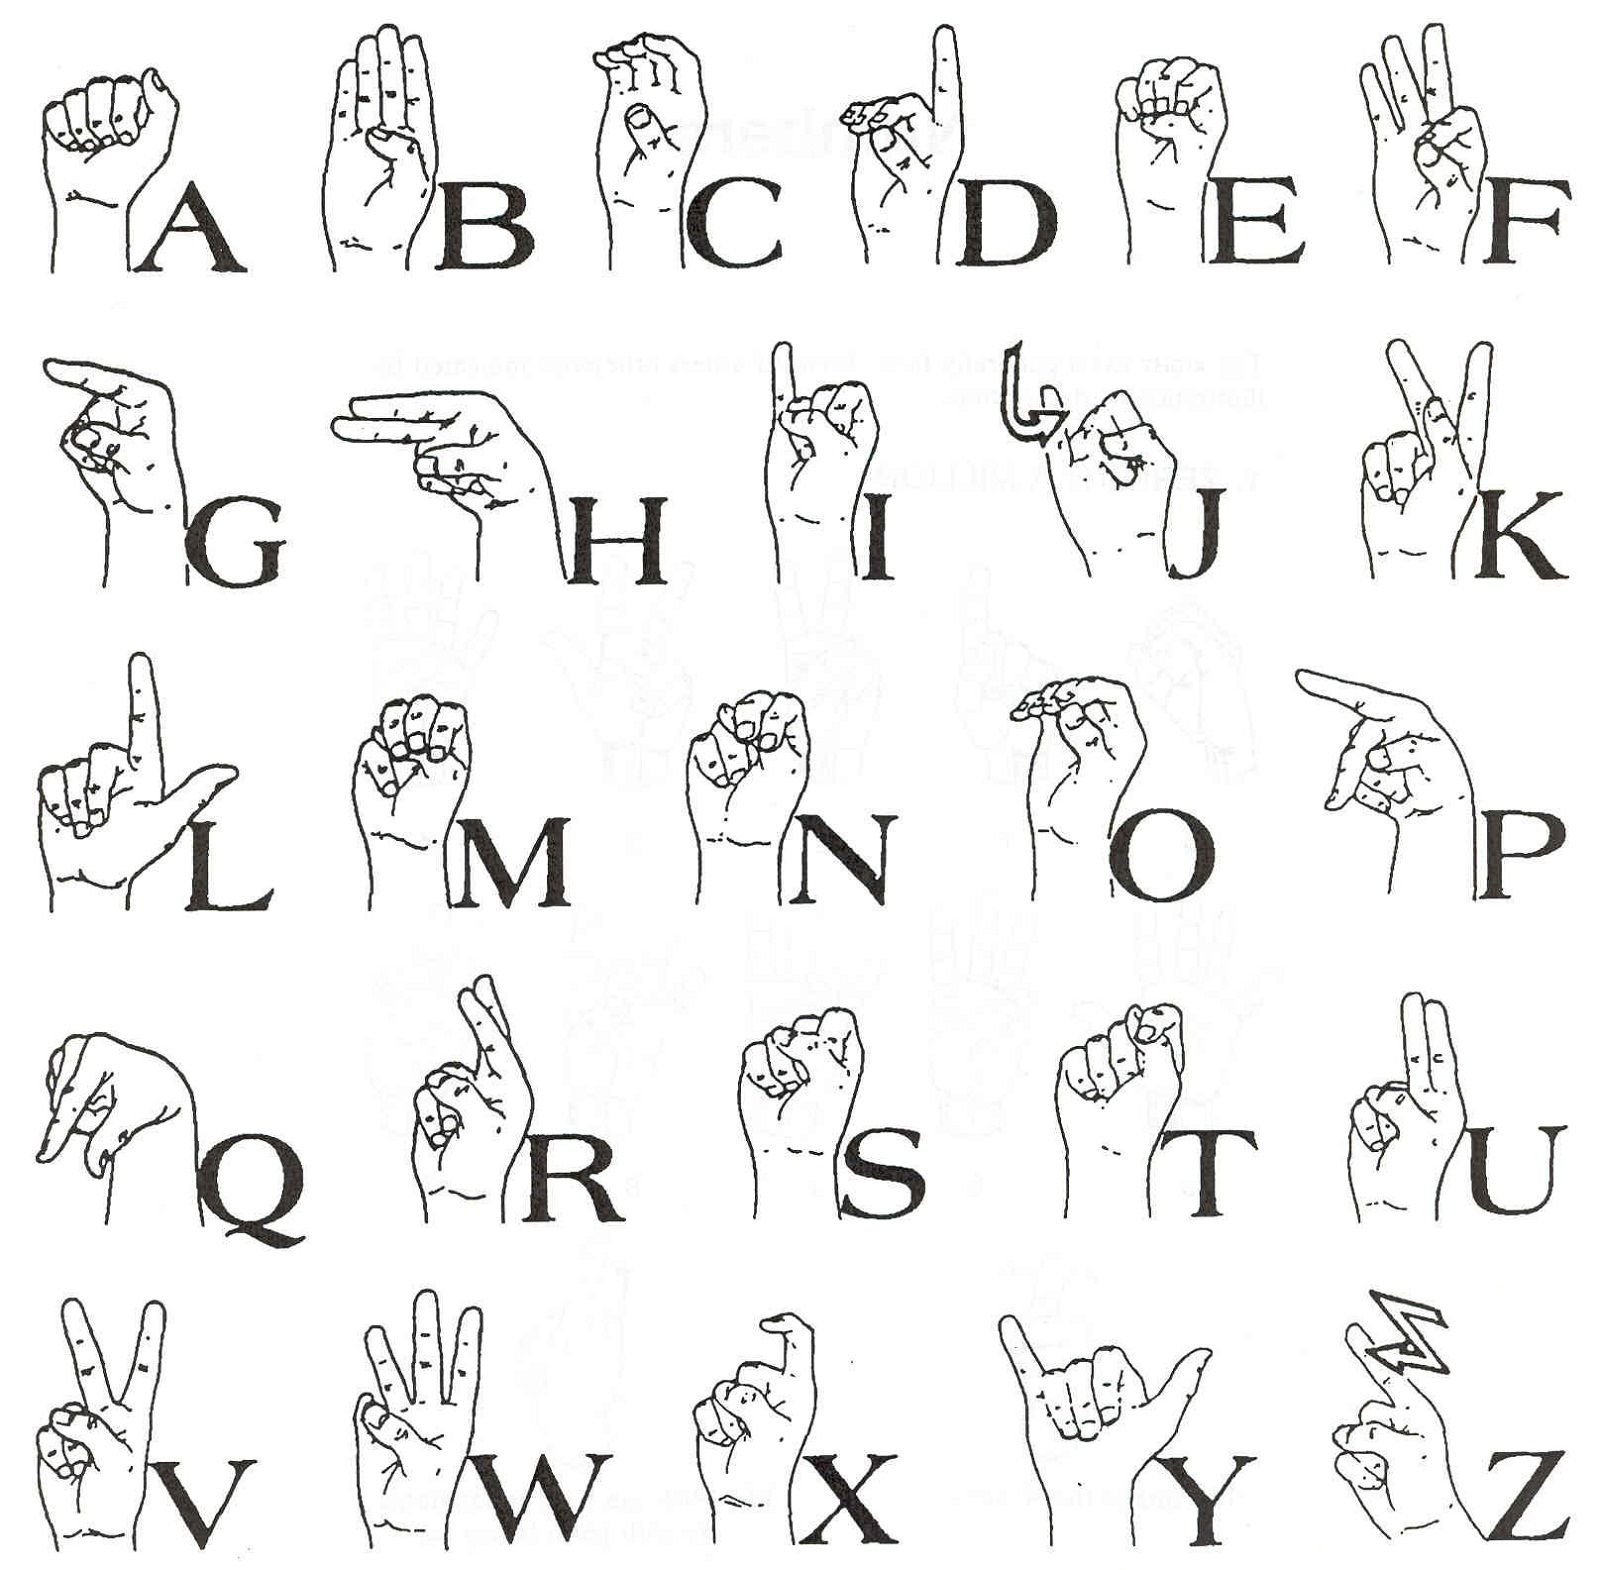 Sign Language Images Printable (With images)